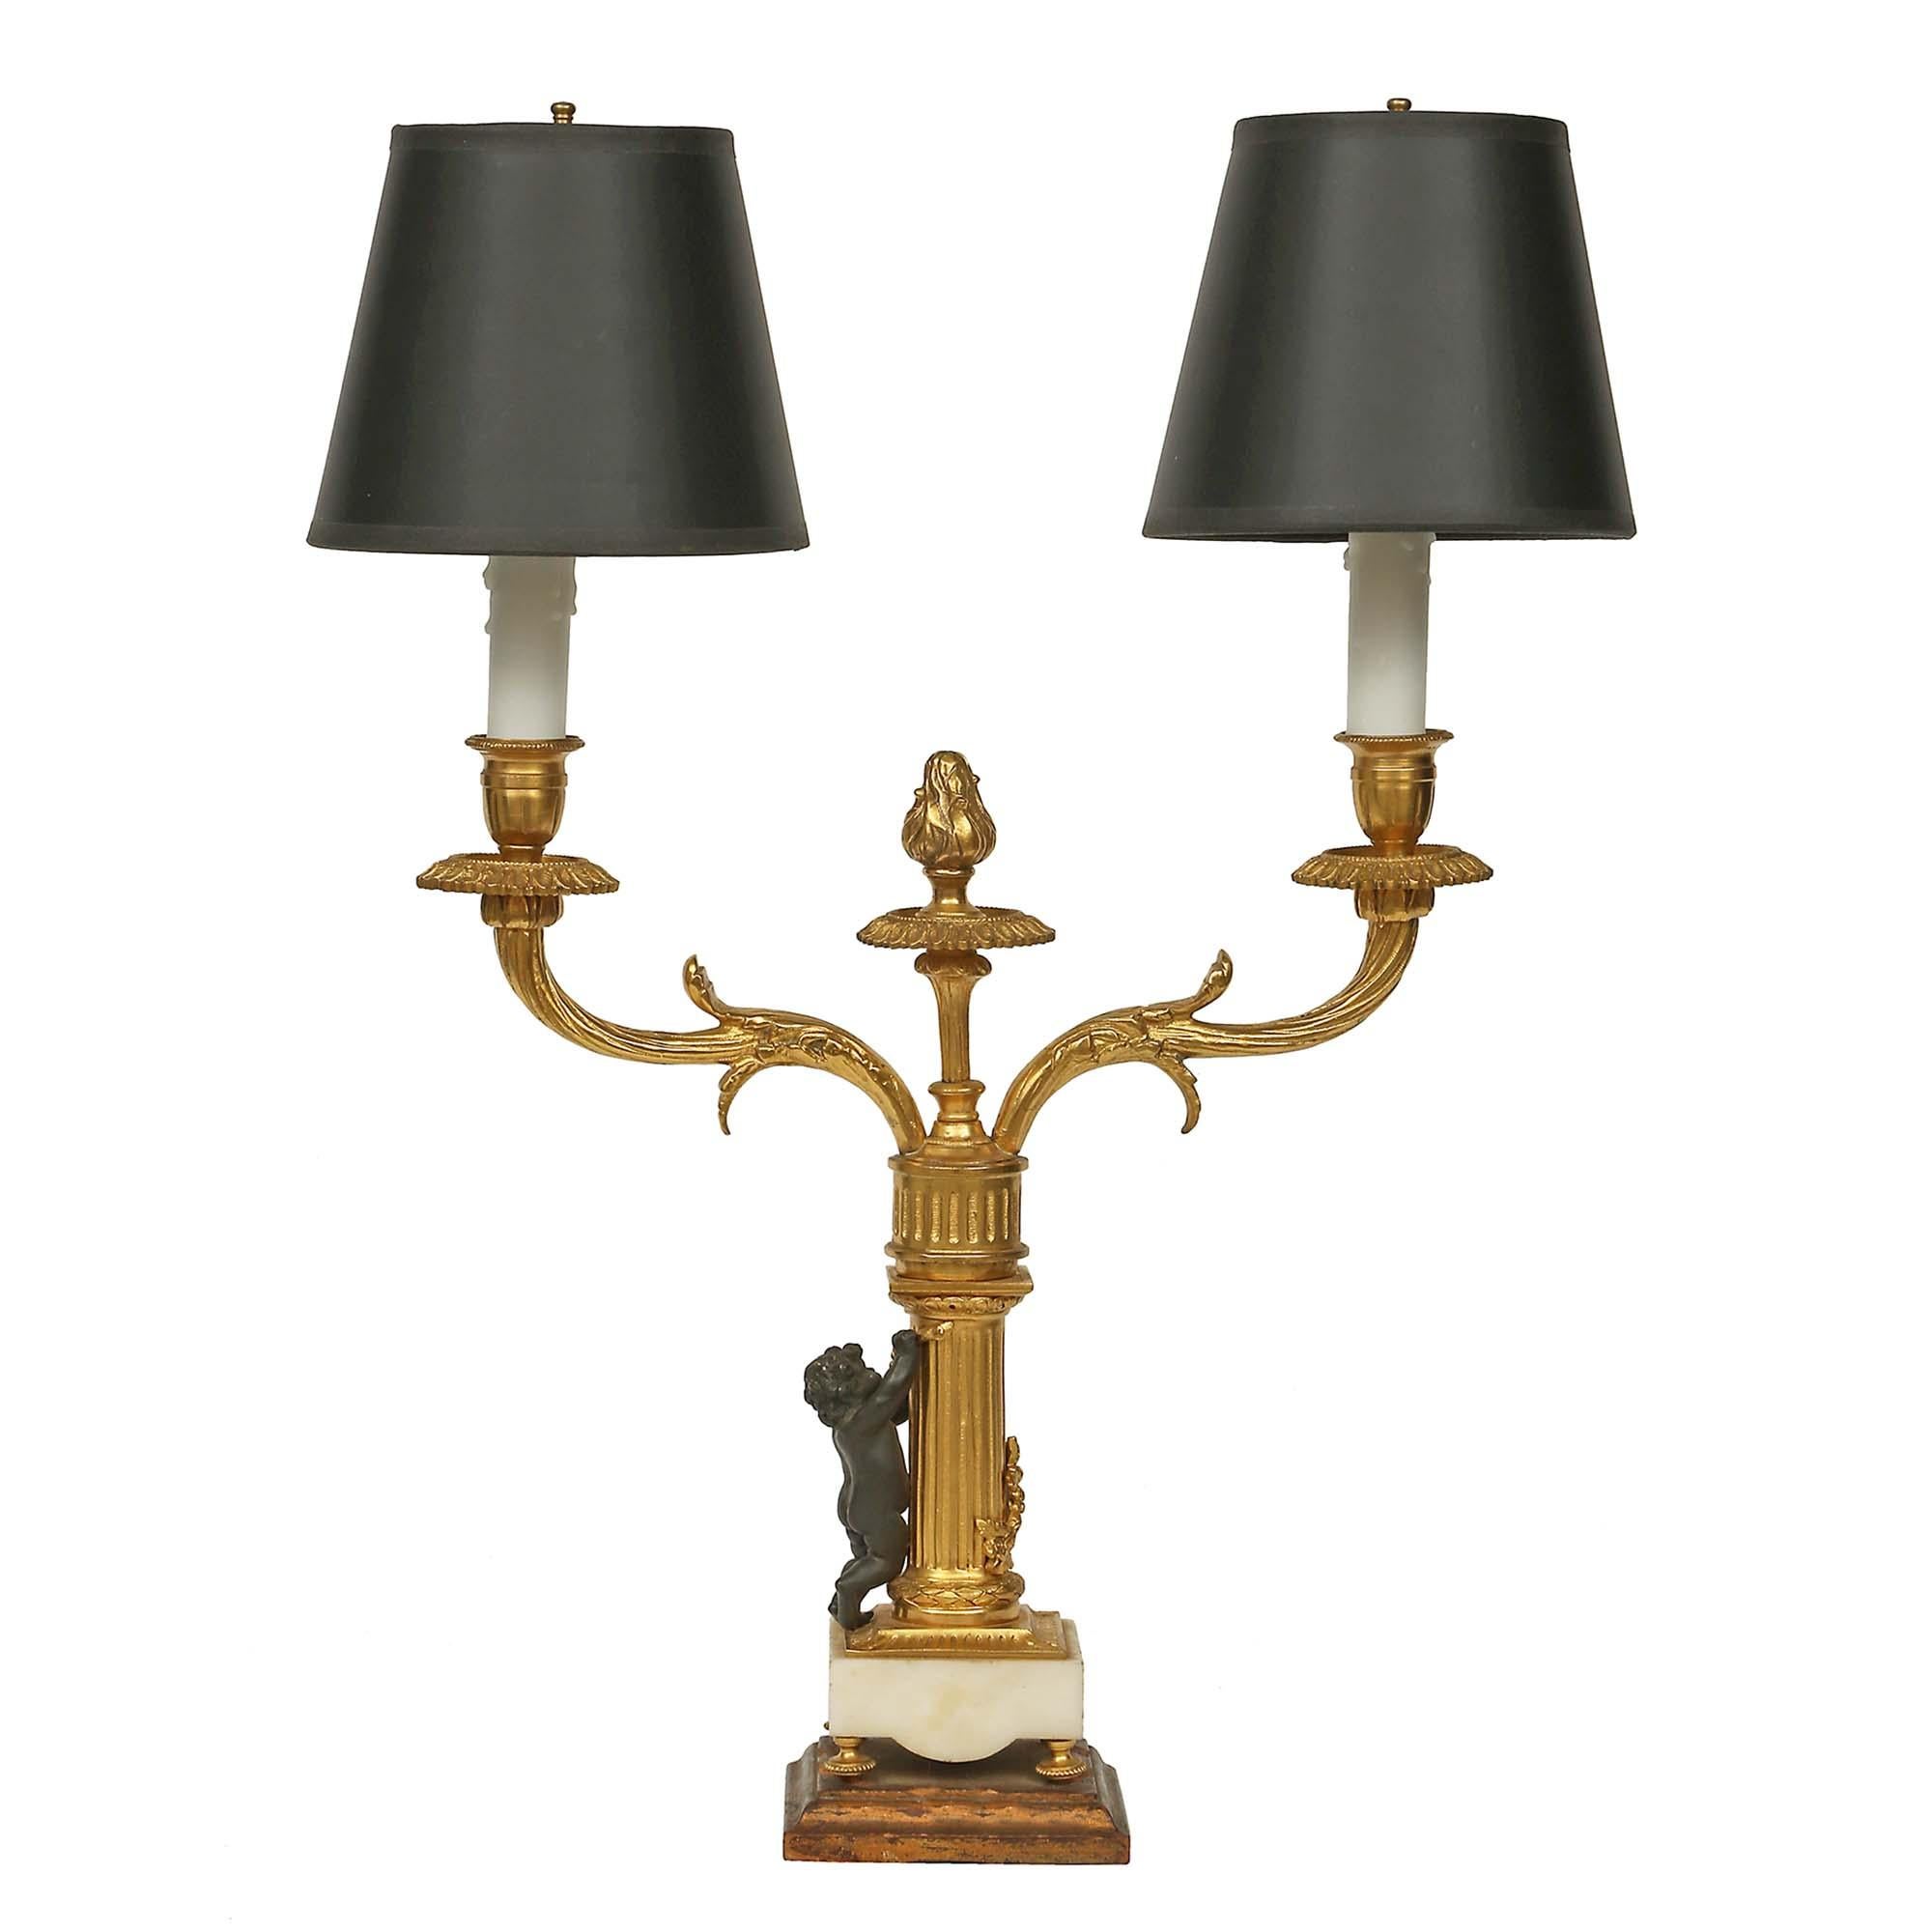 An elegant pair of French mid 19th century two arm candelabras in ormolu and patinated bronze mounted into lamps. The pair is raised on a square giltwood base below a white Carrara base. The fluted column is decorated by a bronze cherub holding a